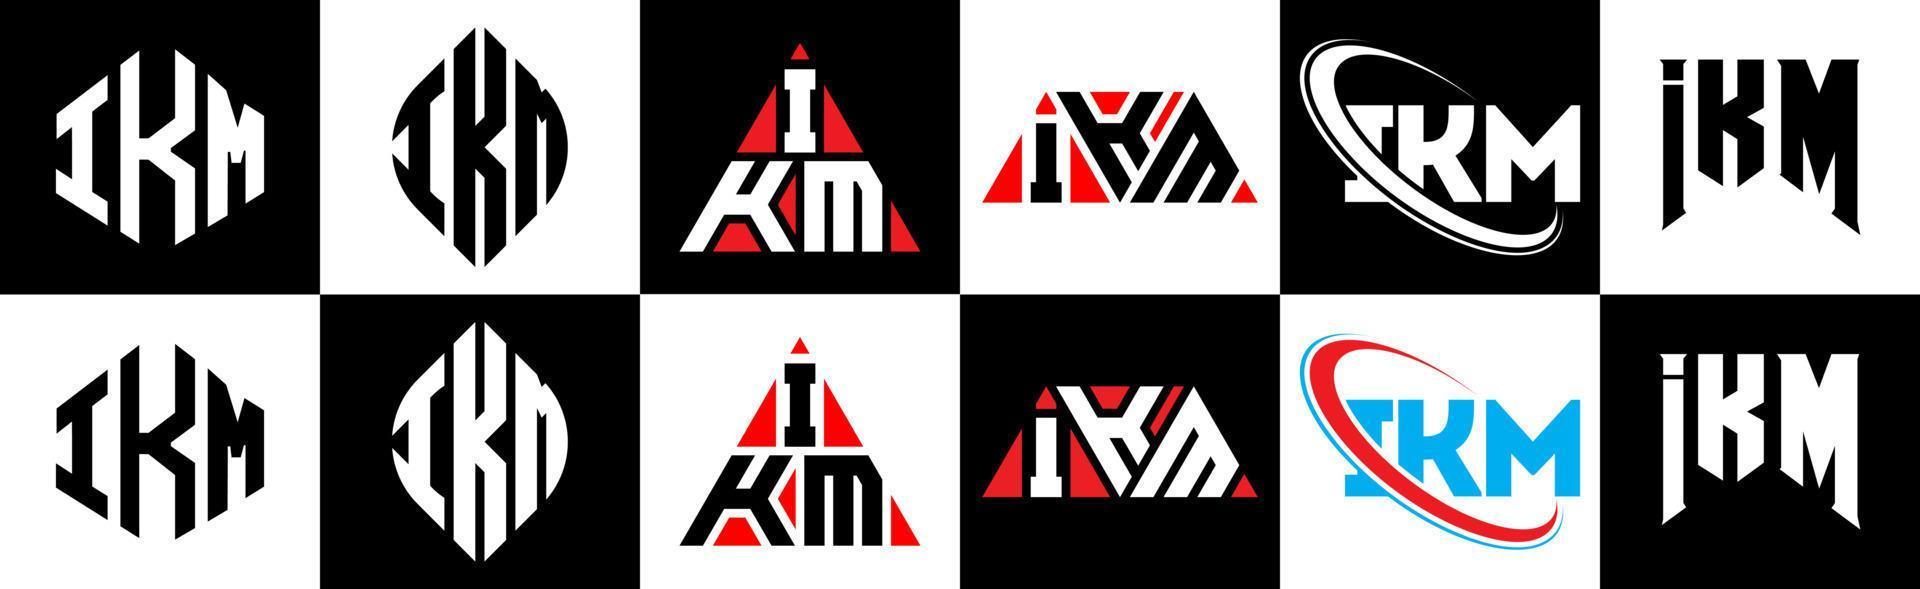 IKM letter logo design in six style. IKM polygon, circle, triangle, hexagon, flat and simple style with black and white color variation letter logo set in one artboard. IKM minimalist and classic logo vector